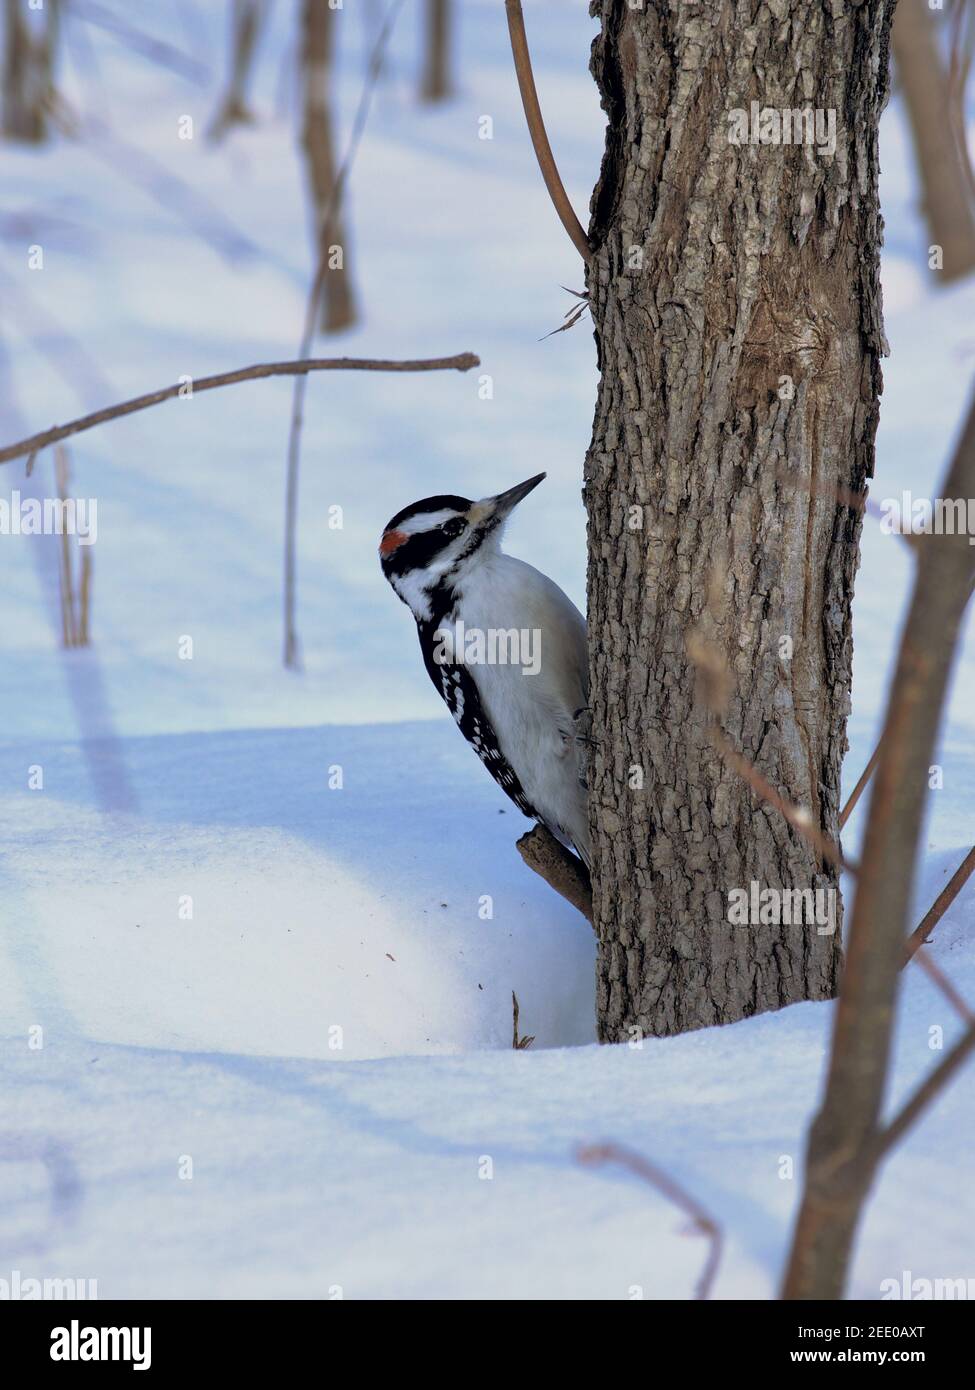 Male downy woodpecker (Dryobates pubescens) sitting low on a small tree, just above the snow. Ottawa, Ontario, Canada. Stock Photo